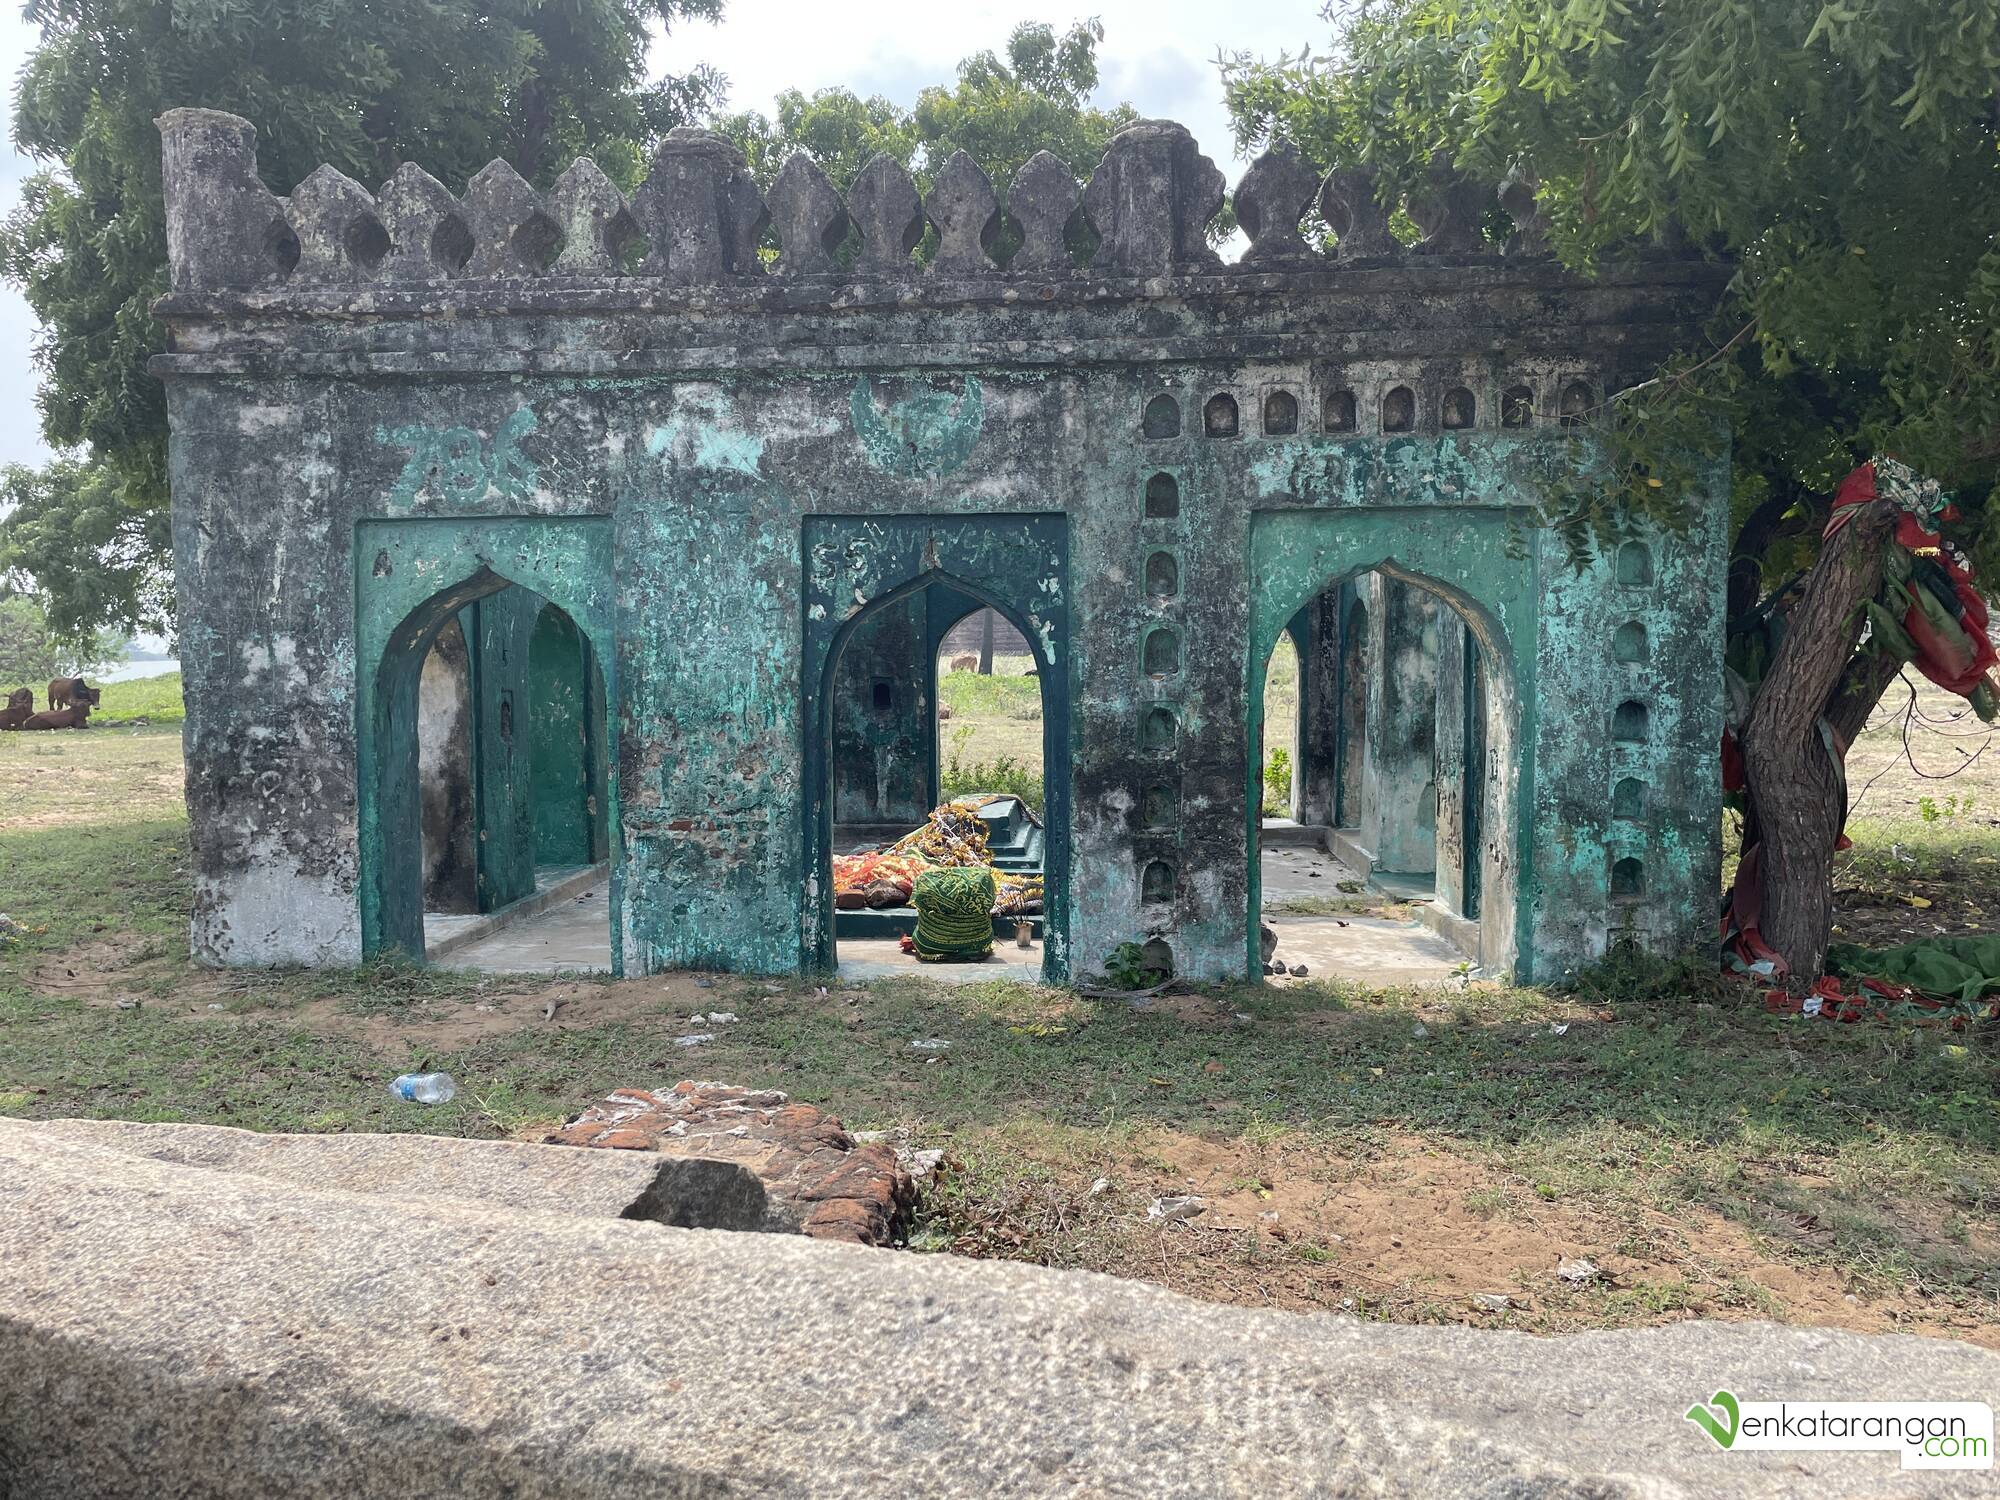 A revered dargah inside the fort walls